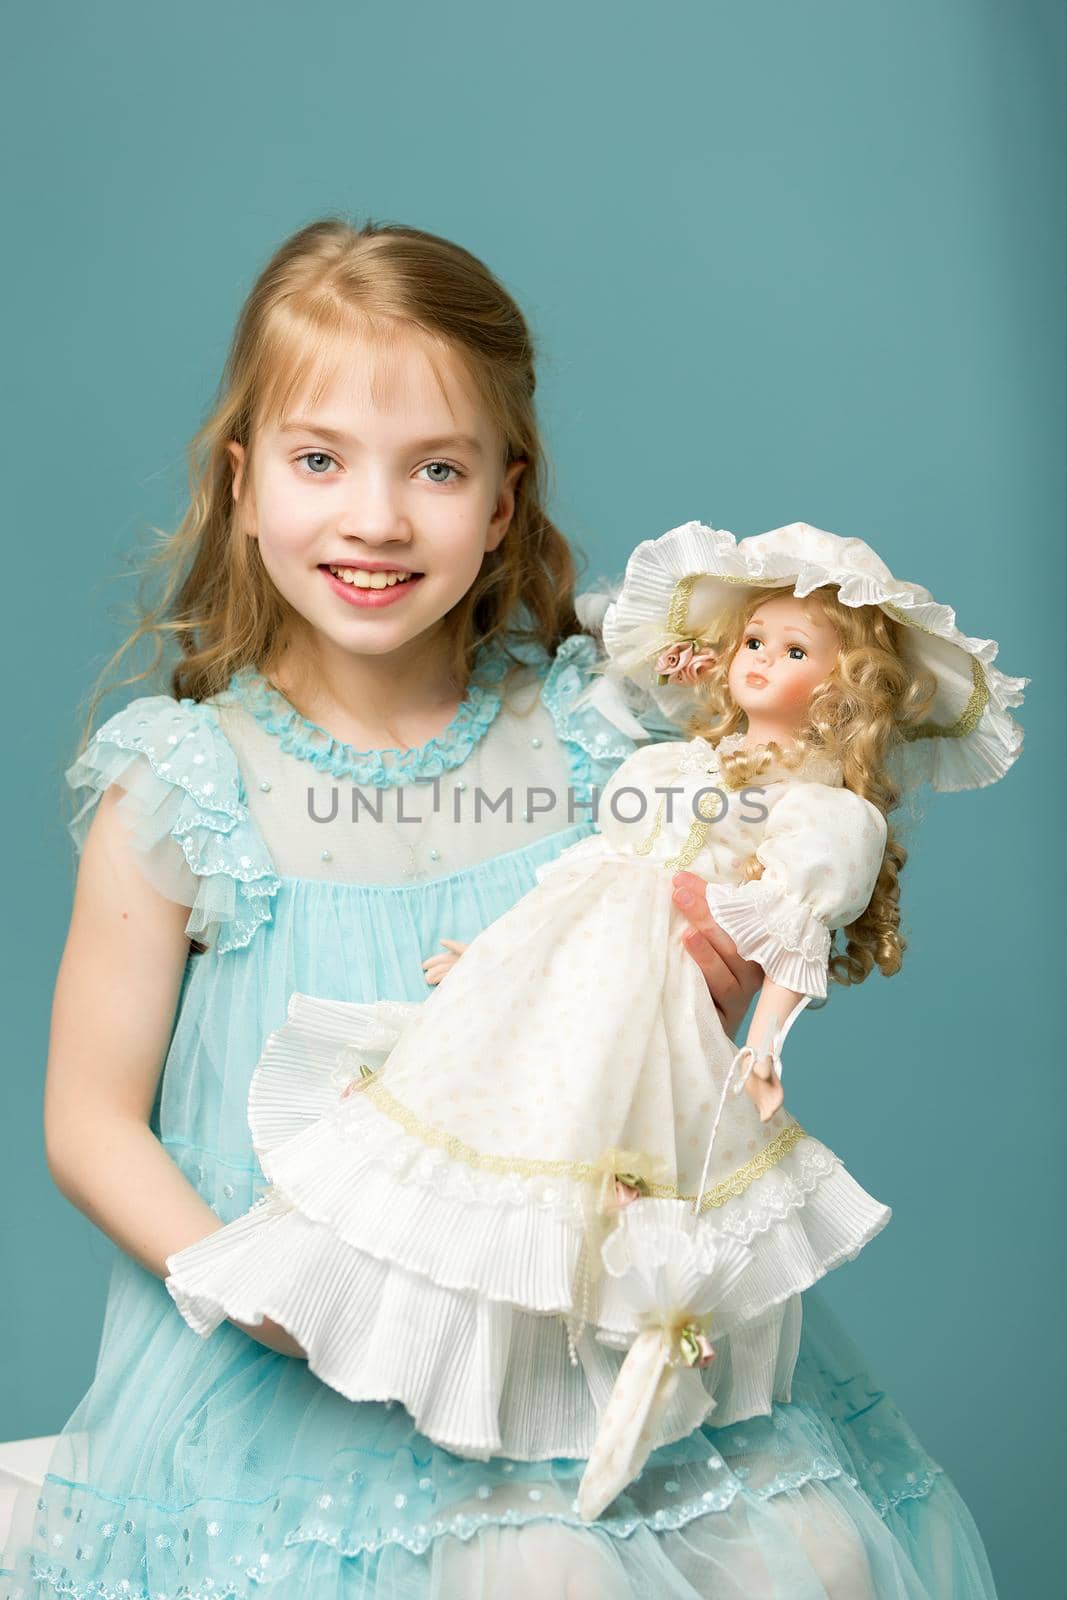 Adorable little girl playing with a doll. Concept of children's games, happy family.